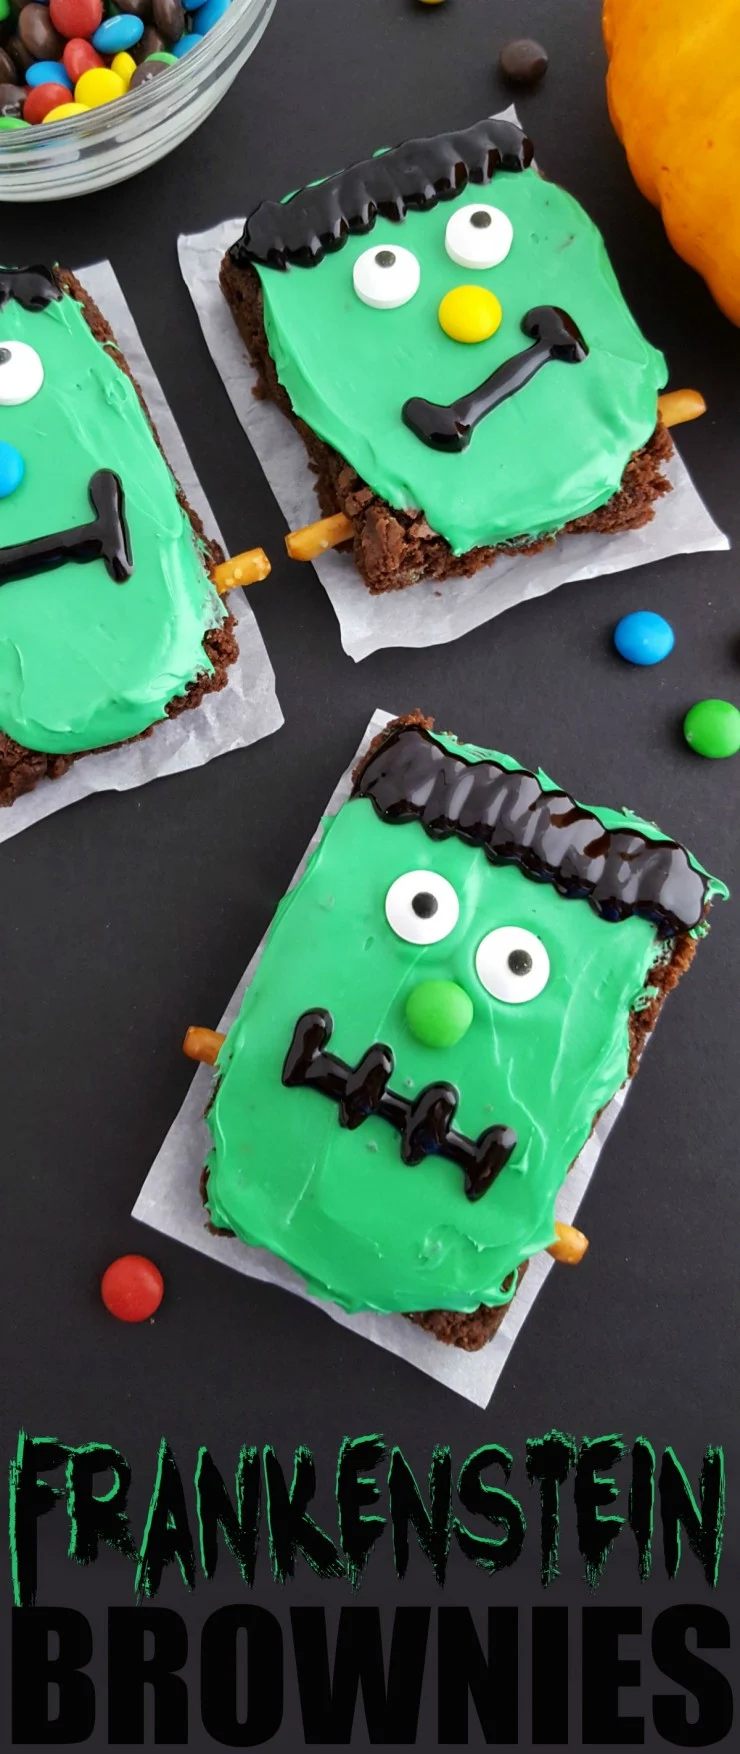 These Frankenstein Brownies are a cute Halloween treat that are a little spooky and a little bit sweet. Perfect for Halloween parties, kids are sure to love this ghoulish treat!